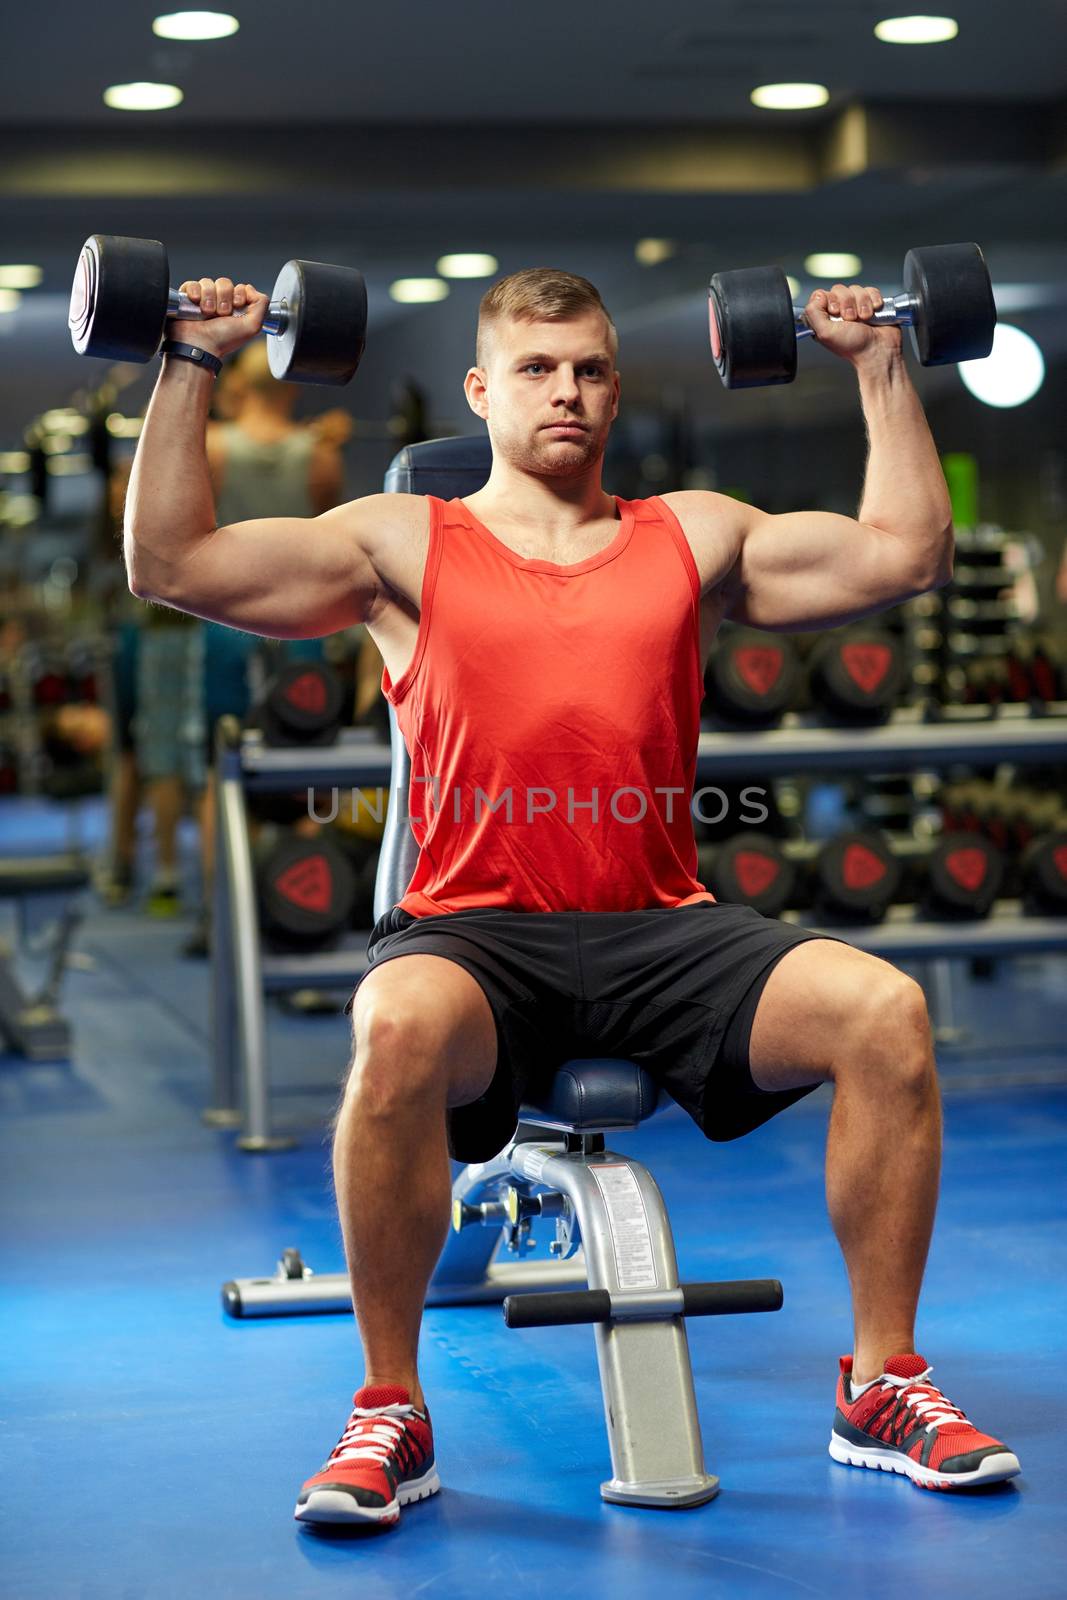 young man with dumbbells flexing muscles in gym by dolgachov